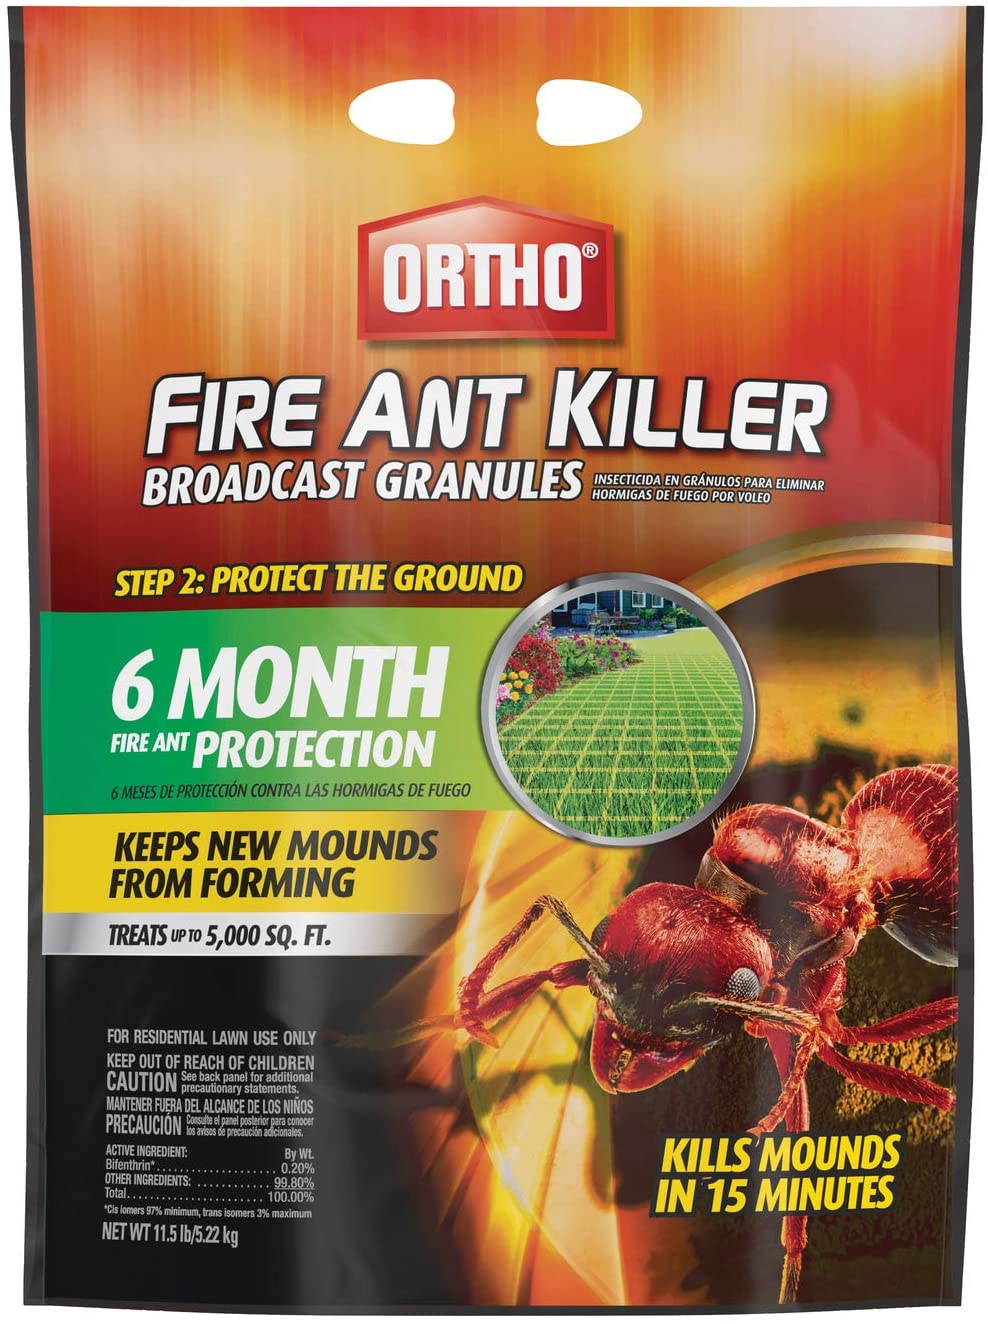 Ortho Fire Ant Killer Broadcast Granules, 6 Month Protection